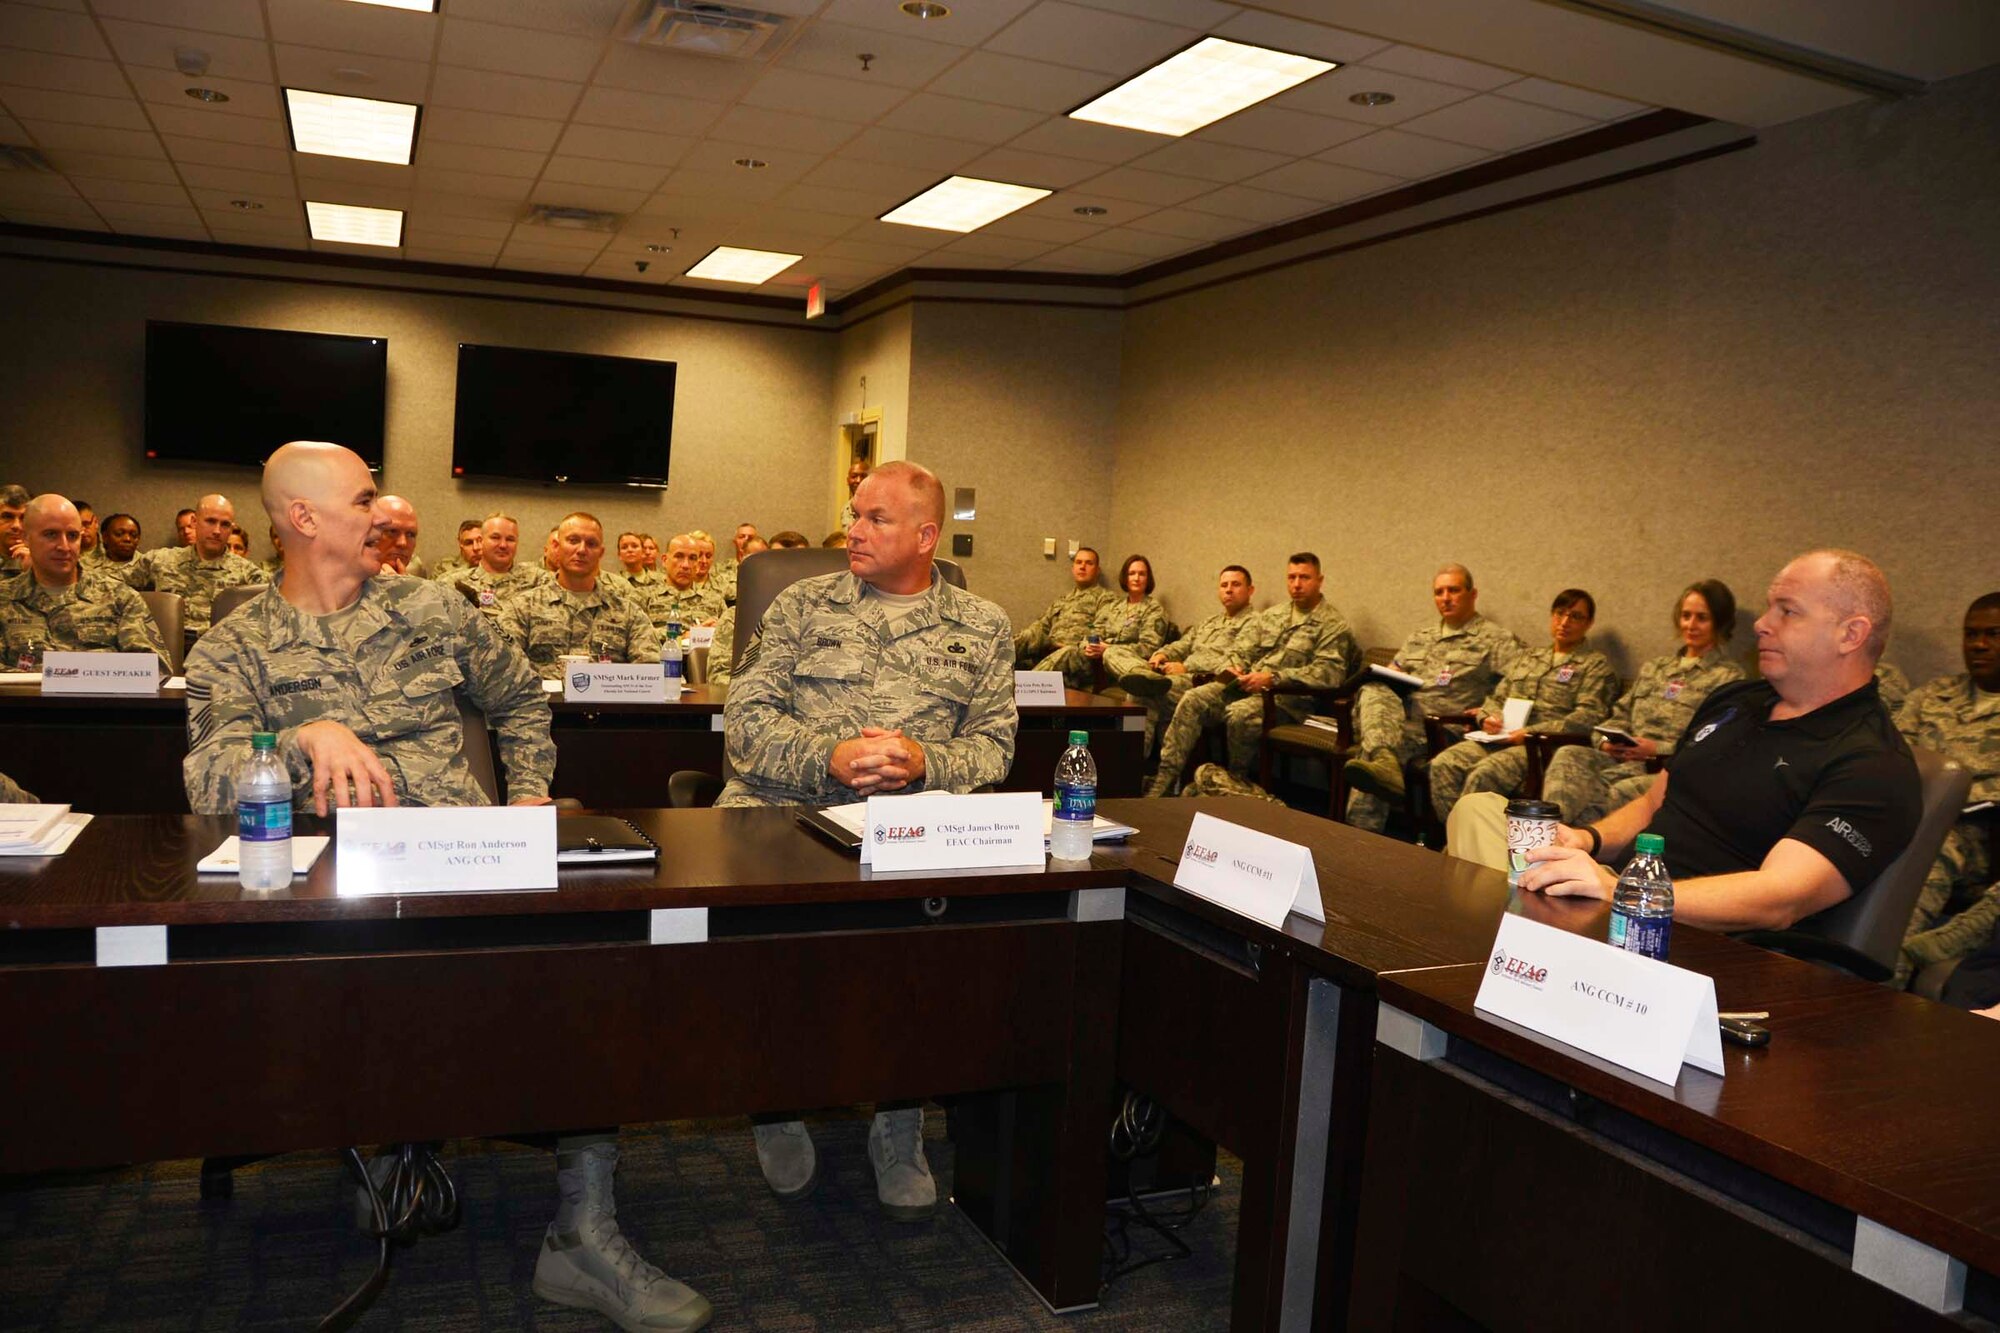 (From left) West Virginia Army National Guard Command Sergeant Maj. James Allen and Air National Guard Enlisted Force Advisory Council Chairman and Kansas National Guard Senior Enlisted Leader, Chief Master Sgt. James Brown, listen to a point by Chief Master Sgt. Richard King, Continental U.S. Aerospace Defense Region-1st Air Force (AFNORTH) Command Chief, during the Enlisted Force Advisory Council Meeting at Tyndall Air Force Base, Fla., Dec. 6-7. It was the first time a command sergeant major attended the Air National Guard EFAC event as it was determined similar issues for enlisted forces existed across both armed service brances. Brown will attend the next Army Command Sergeant Major Advisory Council meeting. (Photo by Mary McHale)